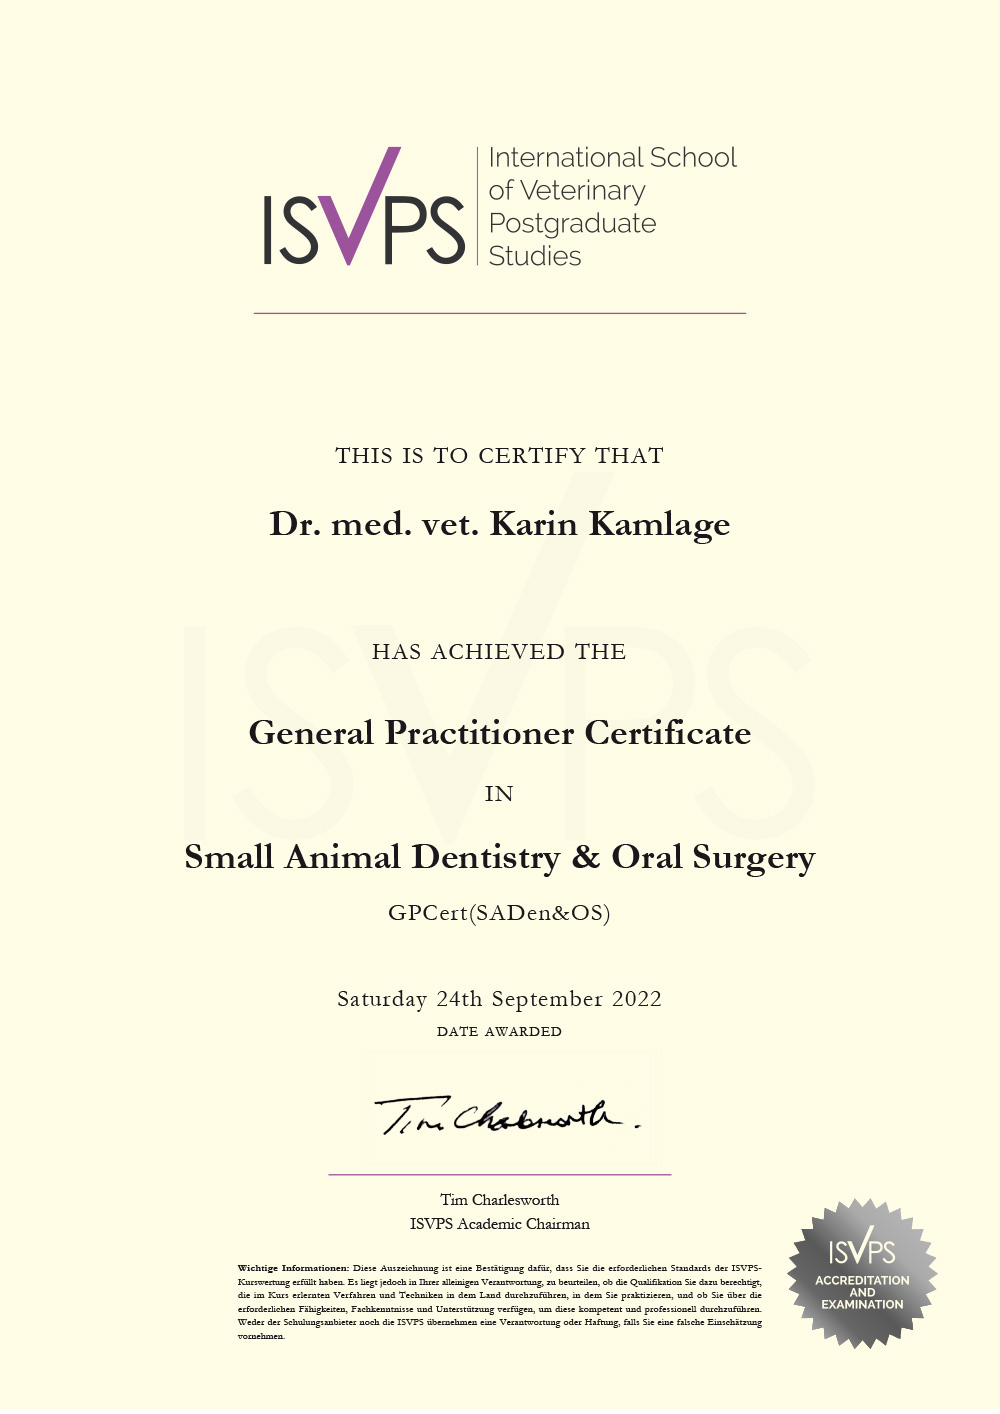 General Practitioner Certificate in Small Animal Dentistry & Oral Surgery